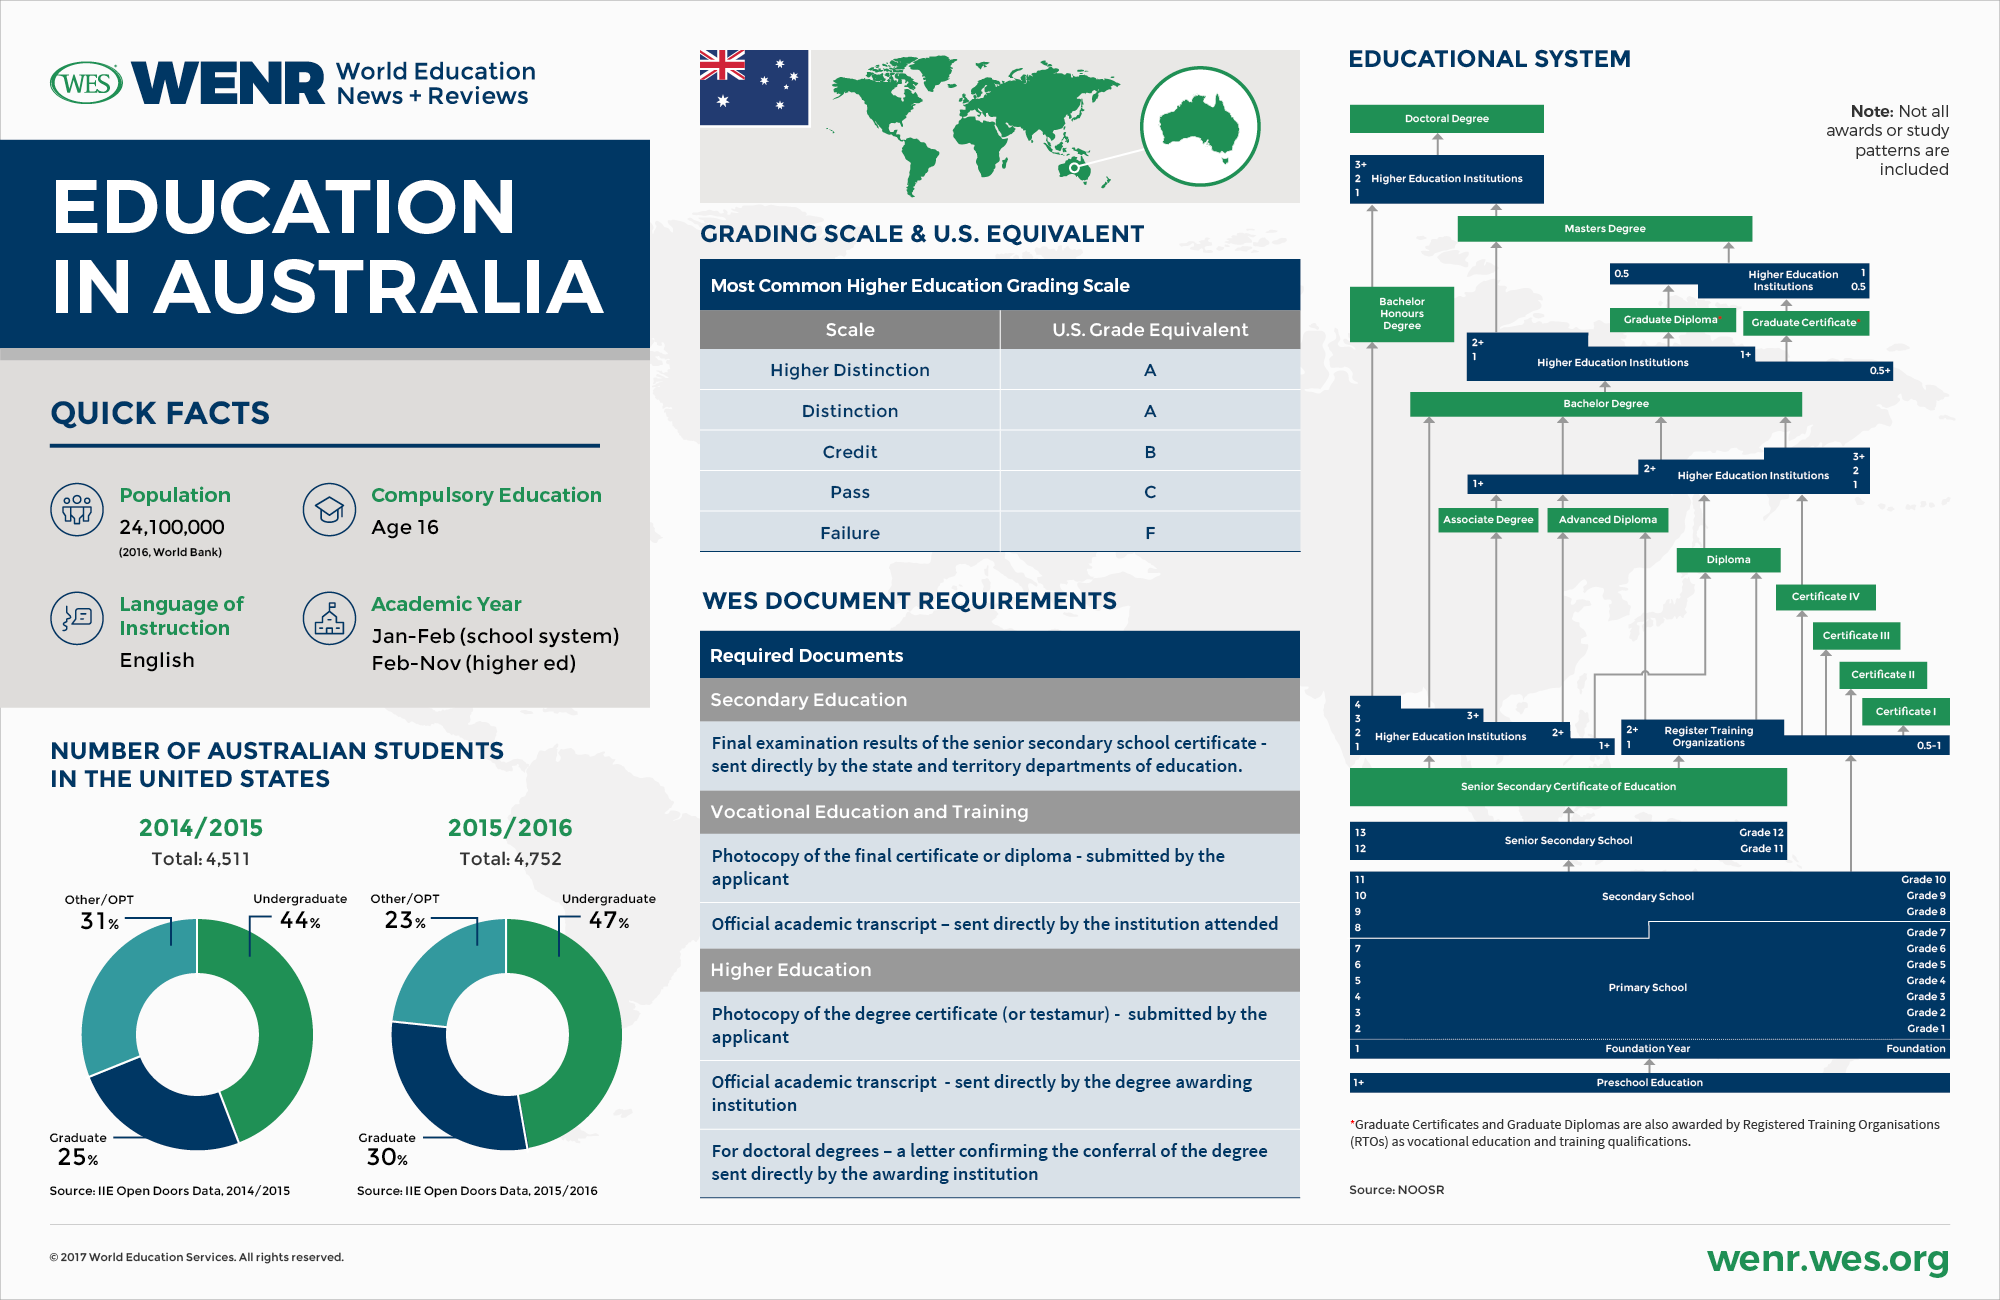 An infographic with fast facts about Australia's education system and international student mobility landscape. 